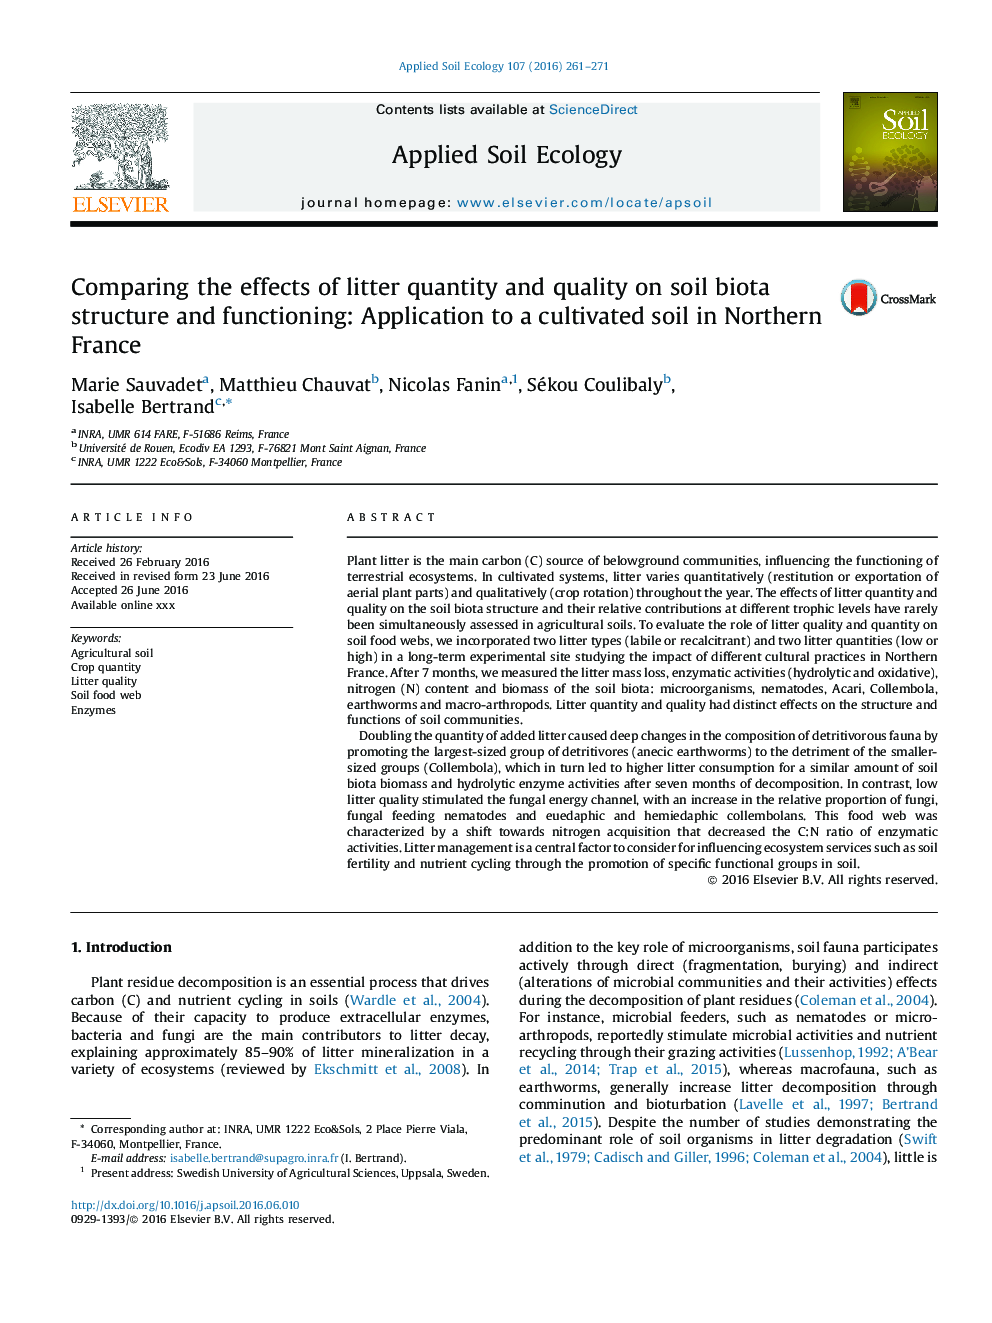 Comparing the effects of litter quantity and quality on soil biota structure and functioning: Application to a cultivated soil in Northern France